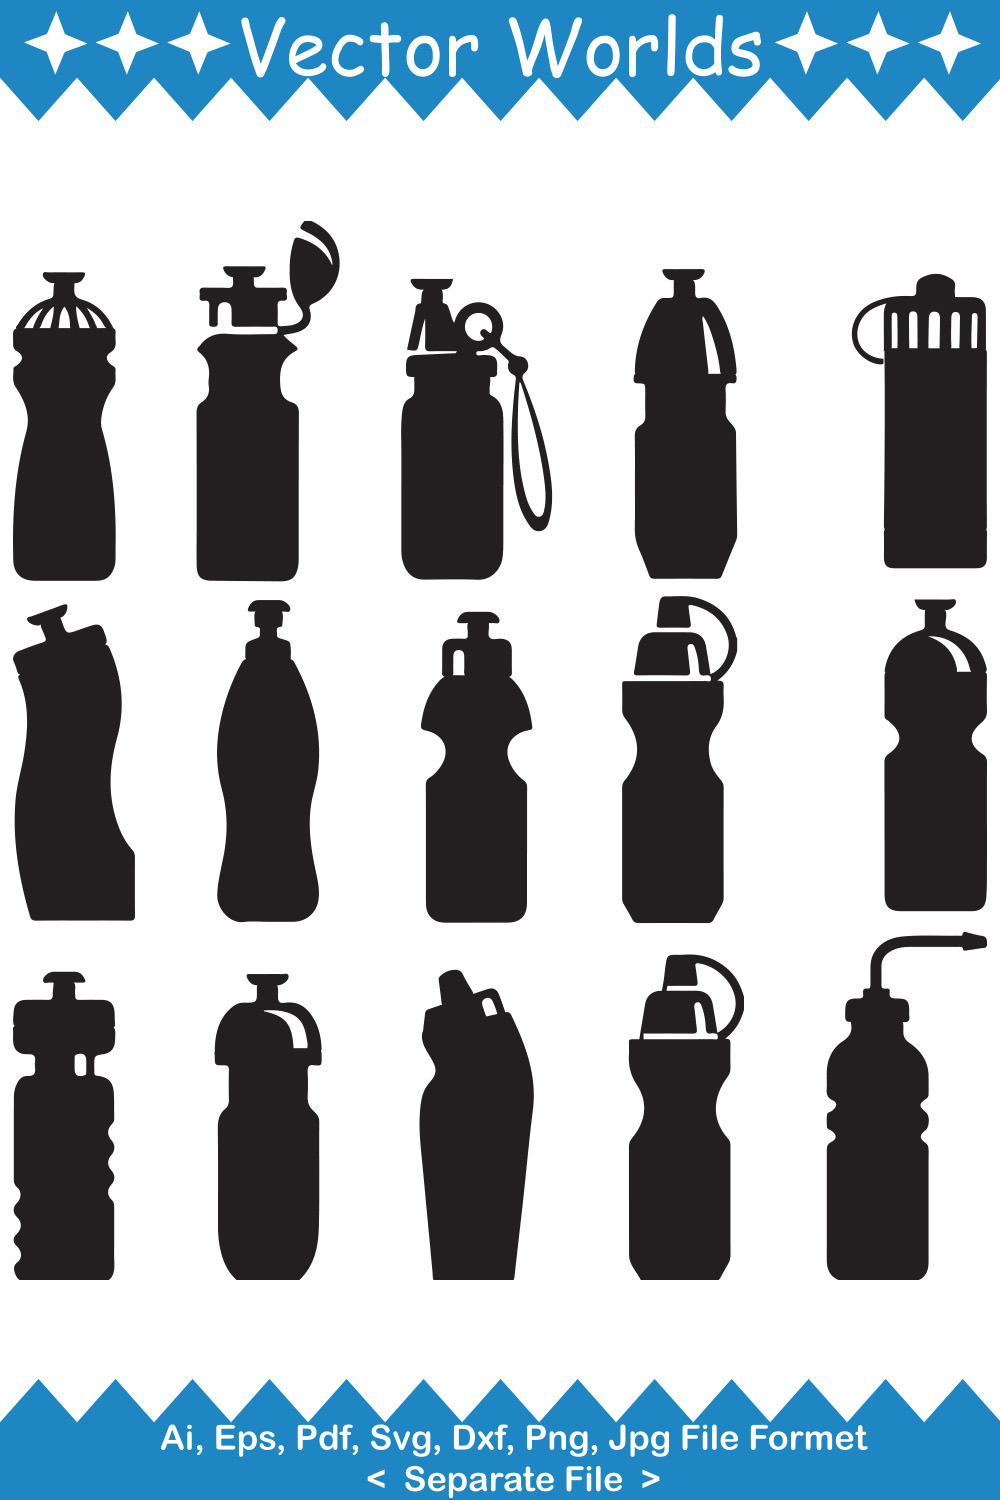 Pack of vector wonderful images of bottles silhouette.